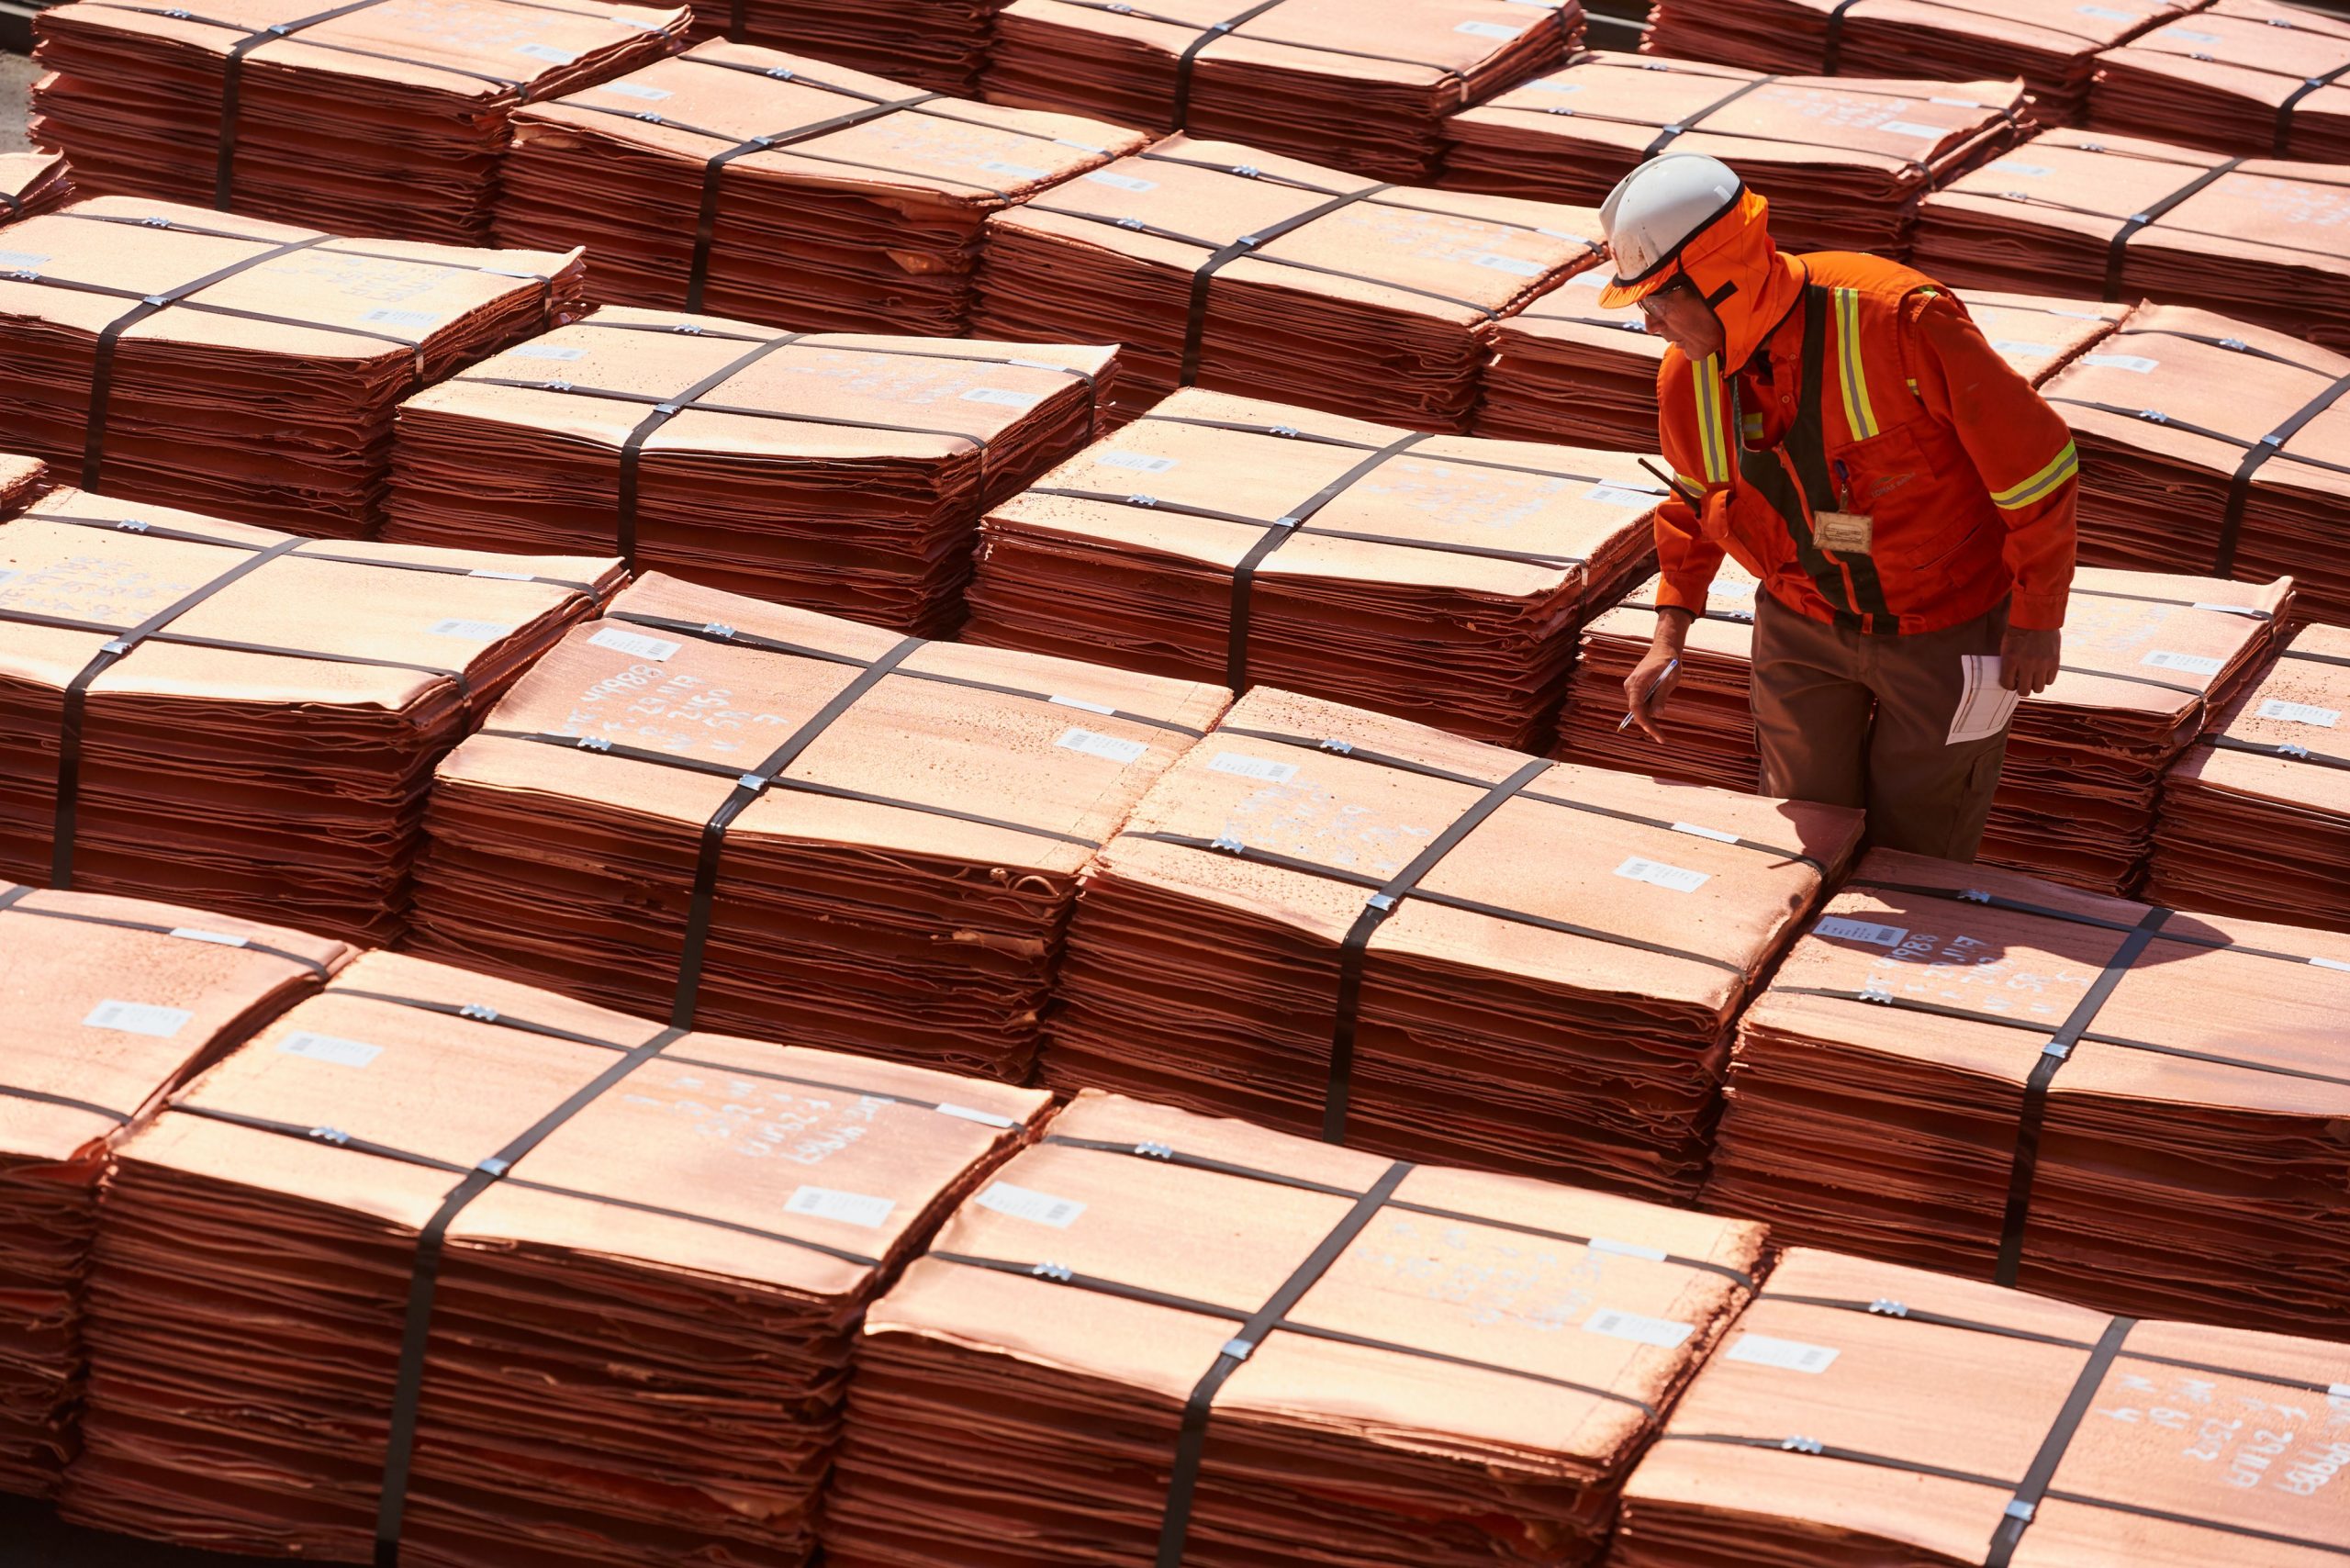 Roskill Sees Structural Shift In Copper Market On Intense Buying From China The Northern Miner